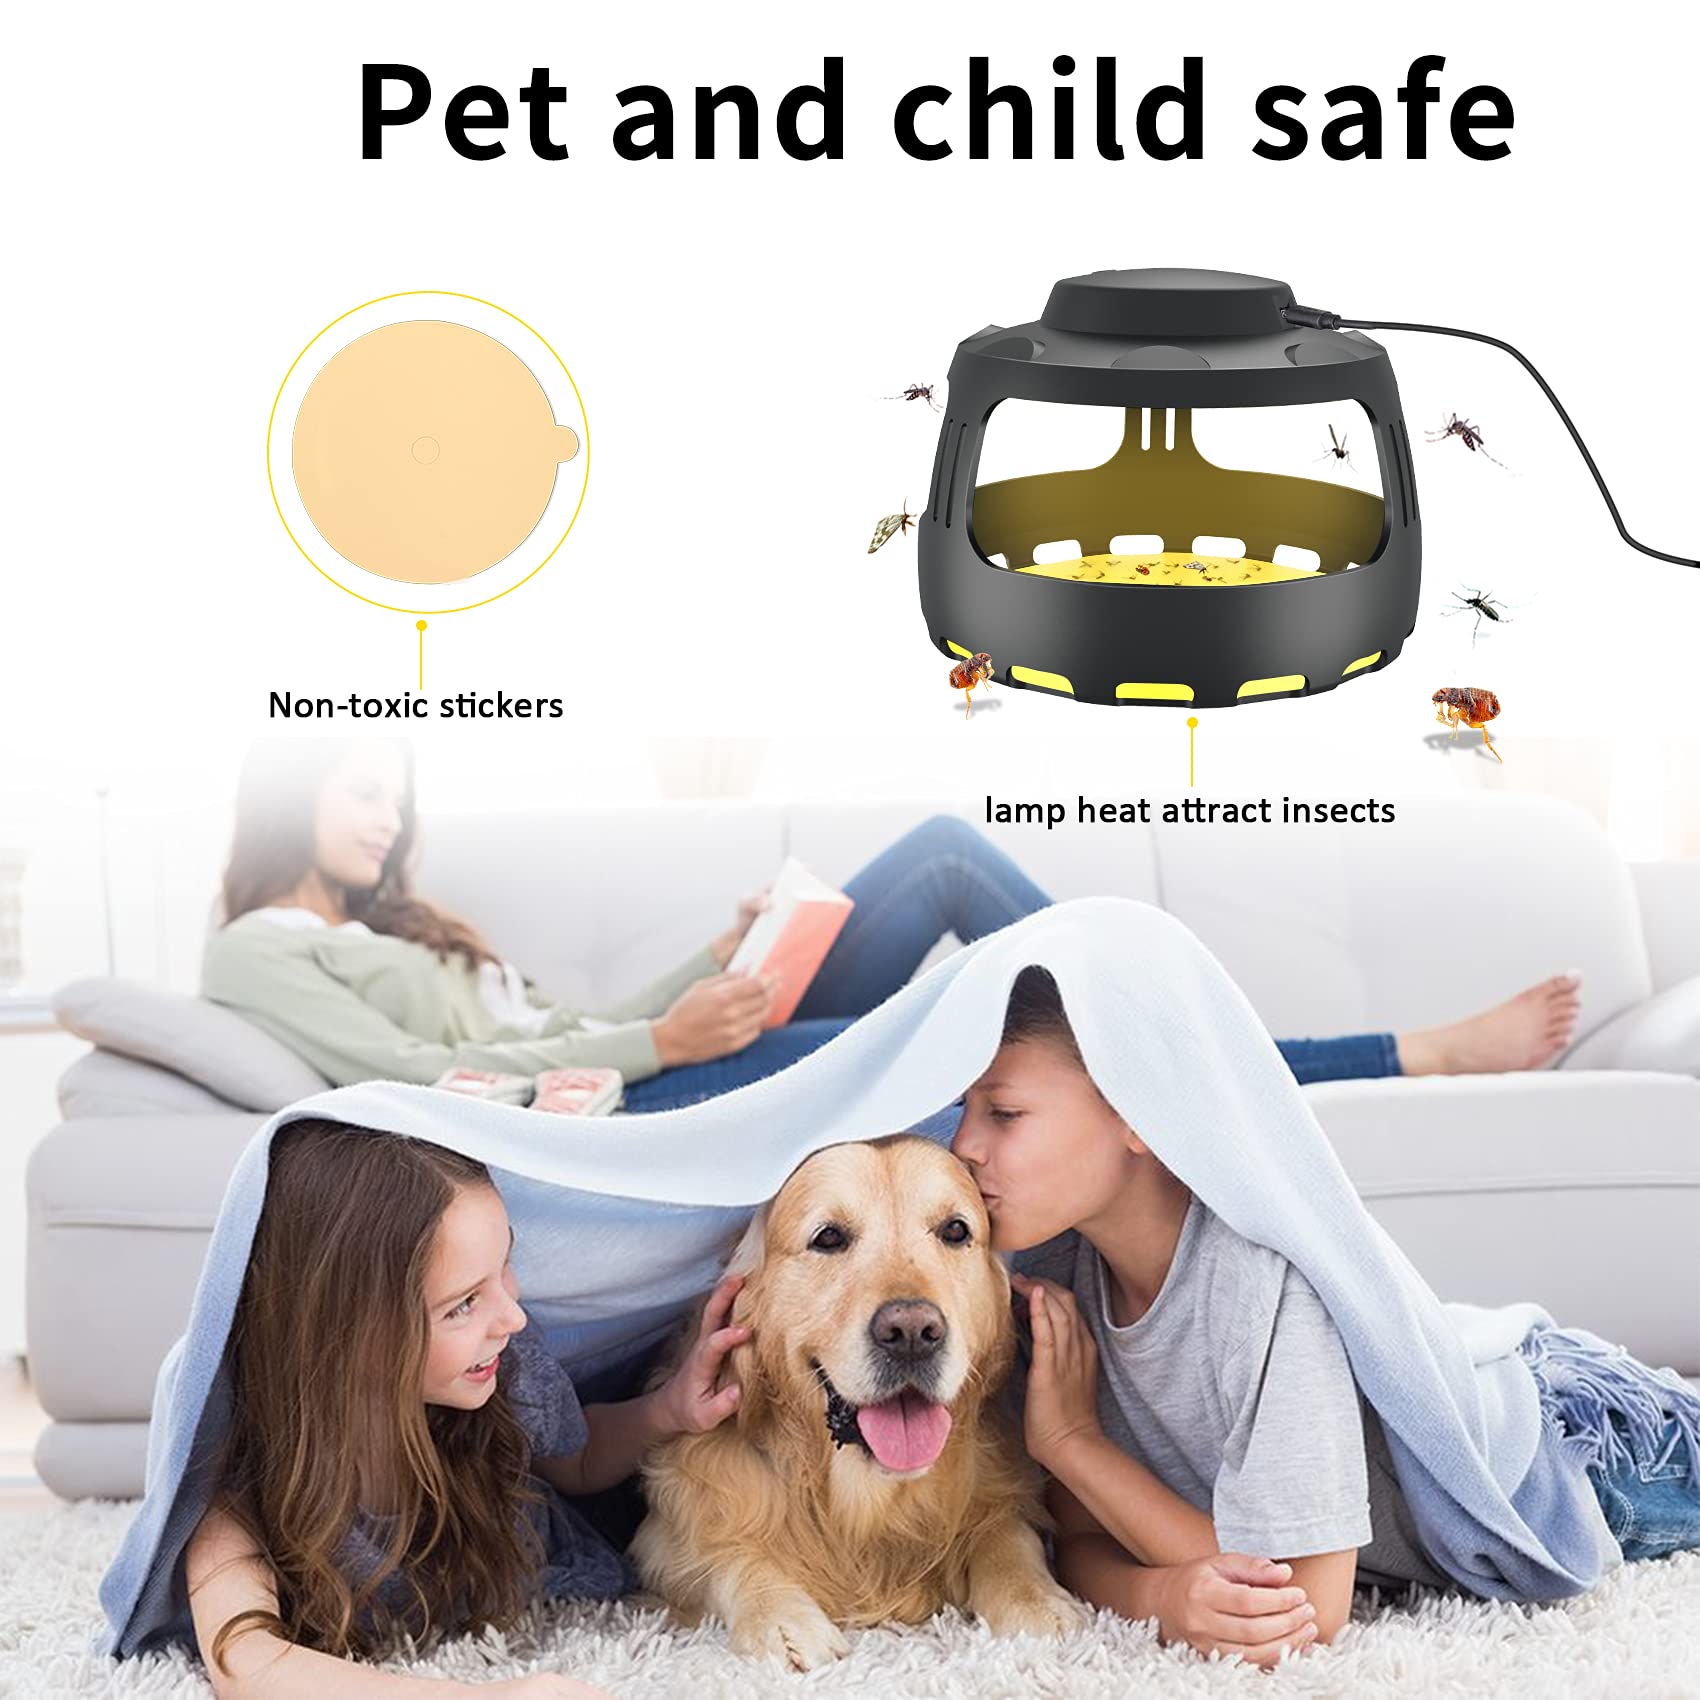 Redeo Flea Trap and Sticky Insect Pad Bed with Glue Discs Natural Fly Killer Trap Light for Mosquitoes and Flies, Best Pest Control and Safe for Family Indoor Use and Pets